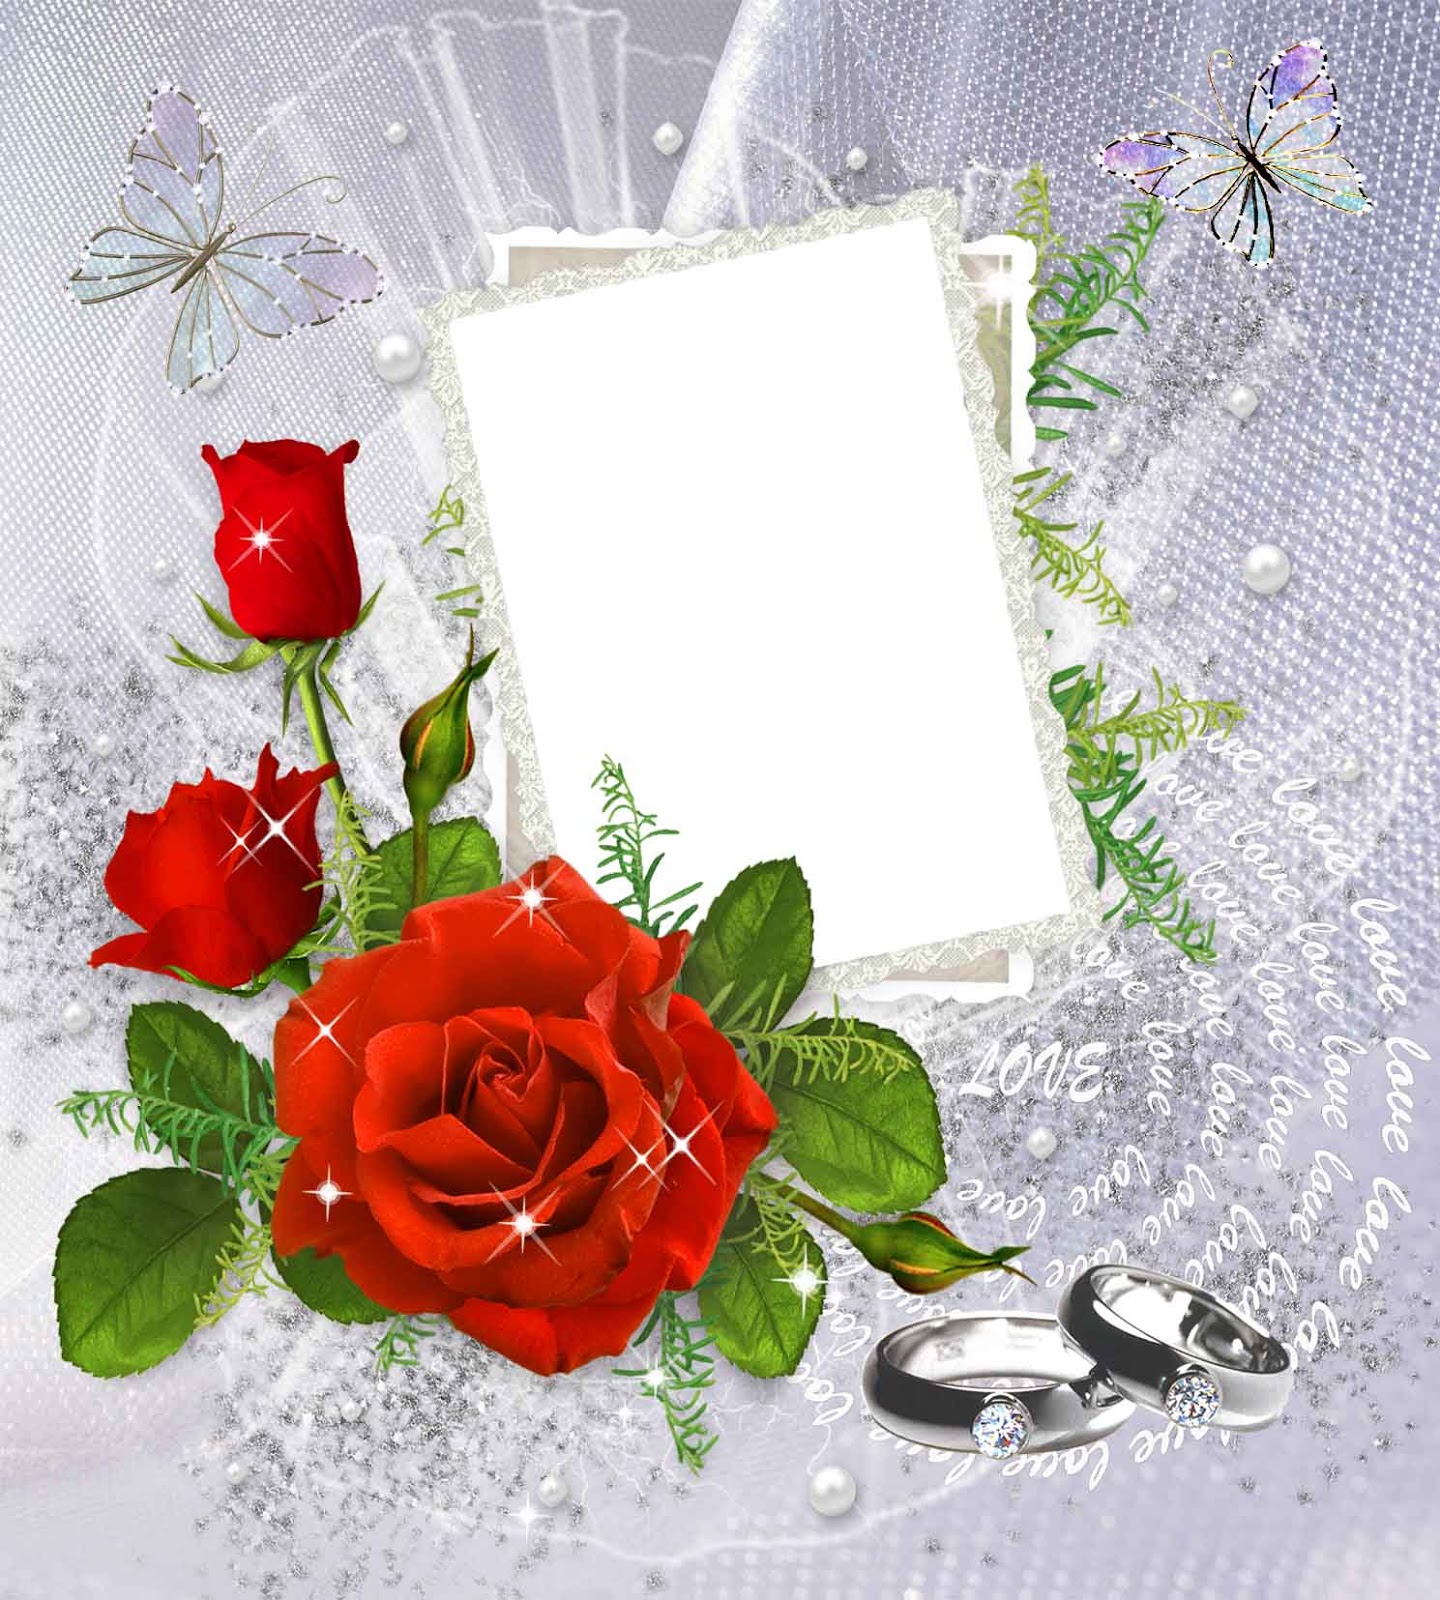 Rings, Roses, Wedding Photo Frame PNG Transparent Background, Free Download  #35206 - FreeIconsPNG